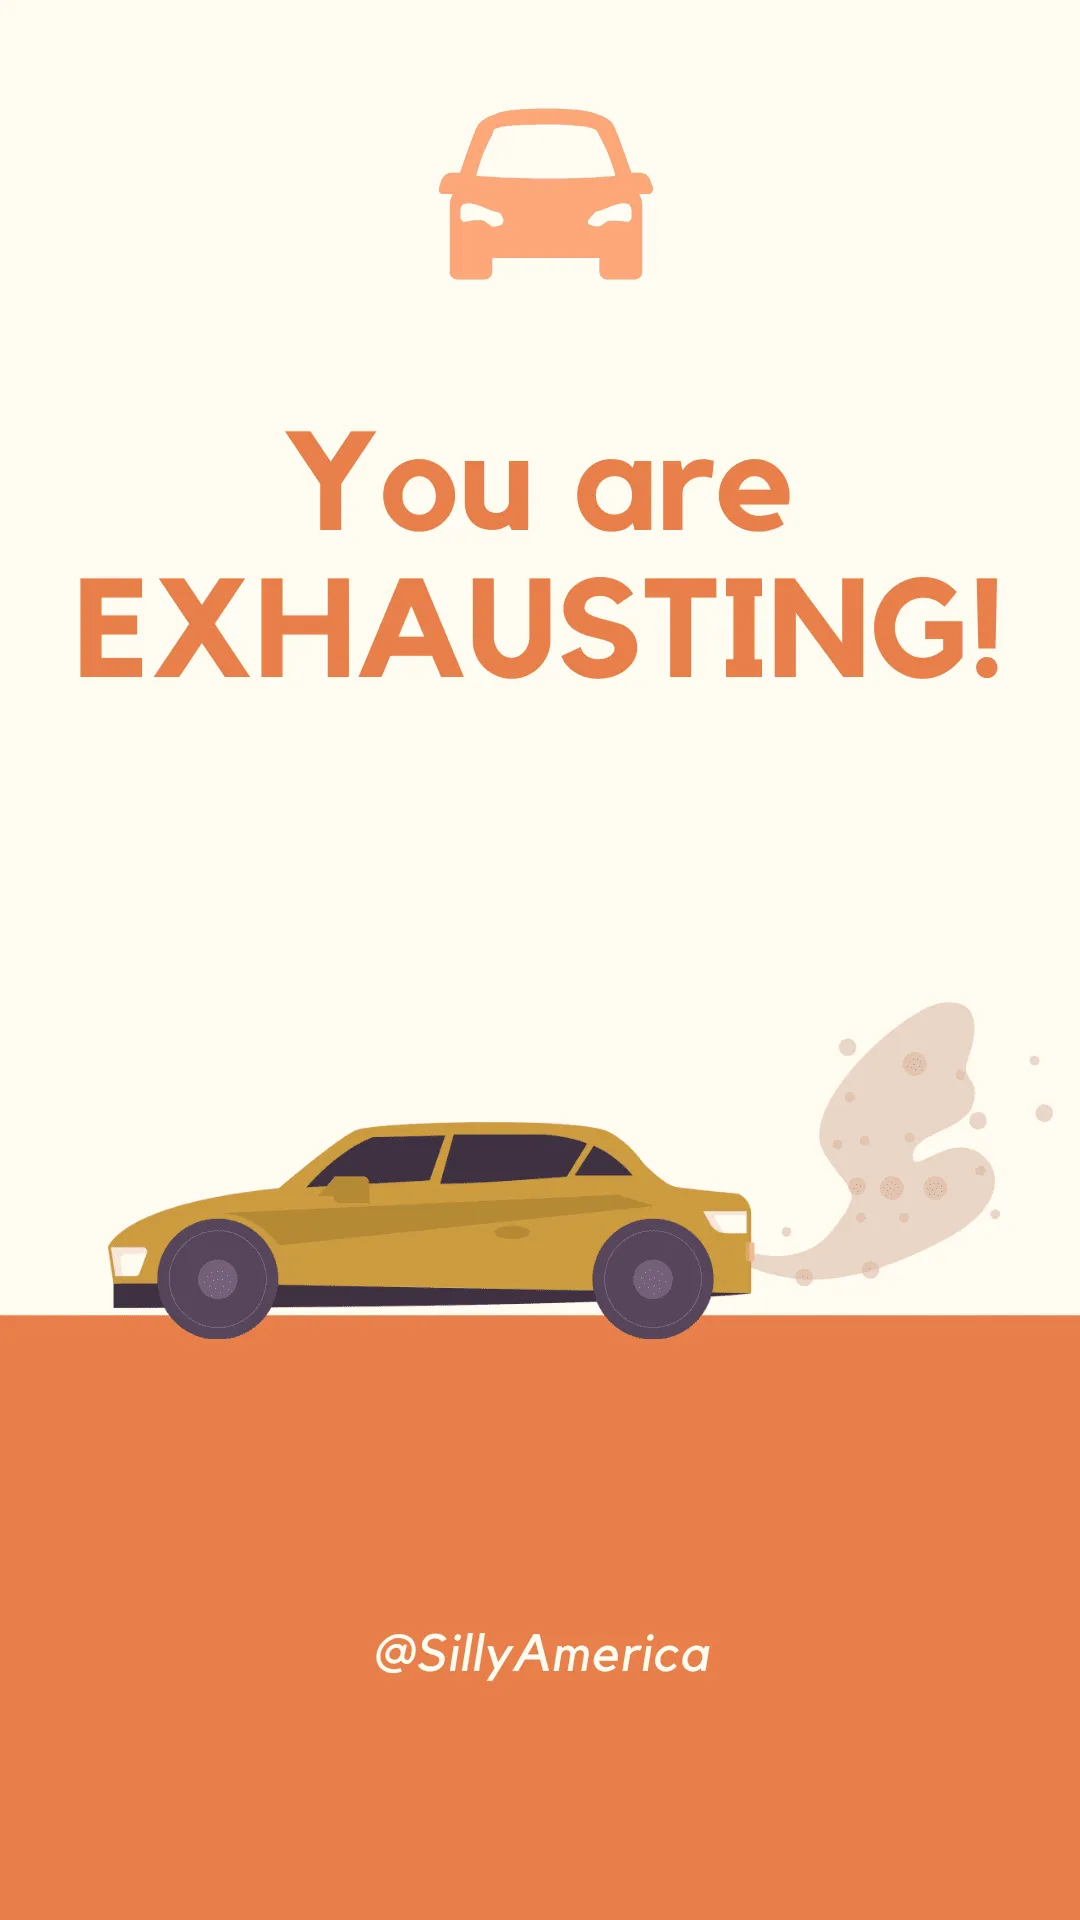 You are EXHAUSTING! - Car Puns to fuel your road trip content!